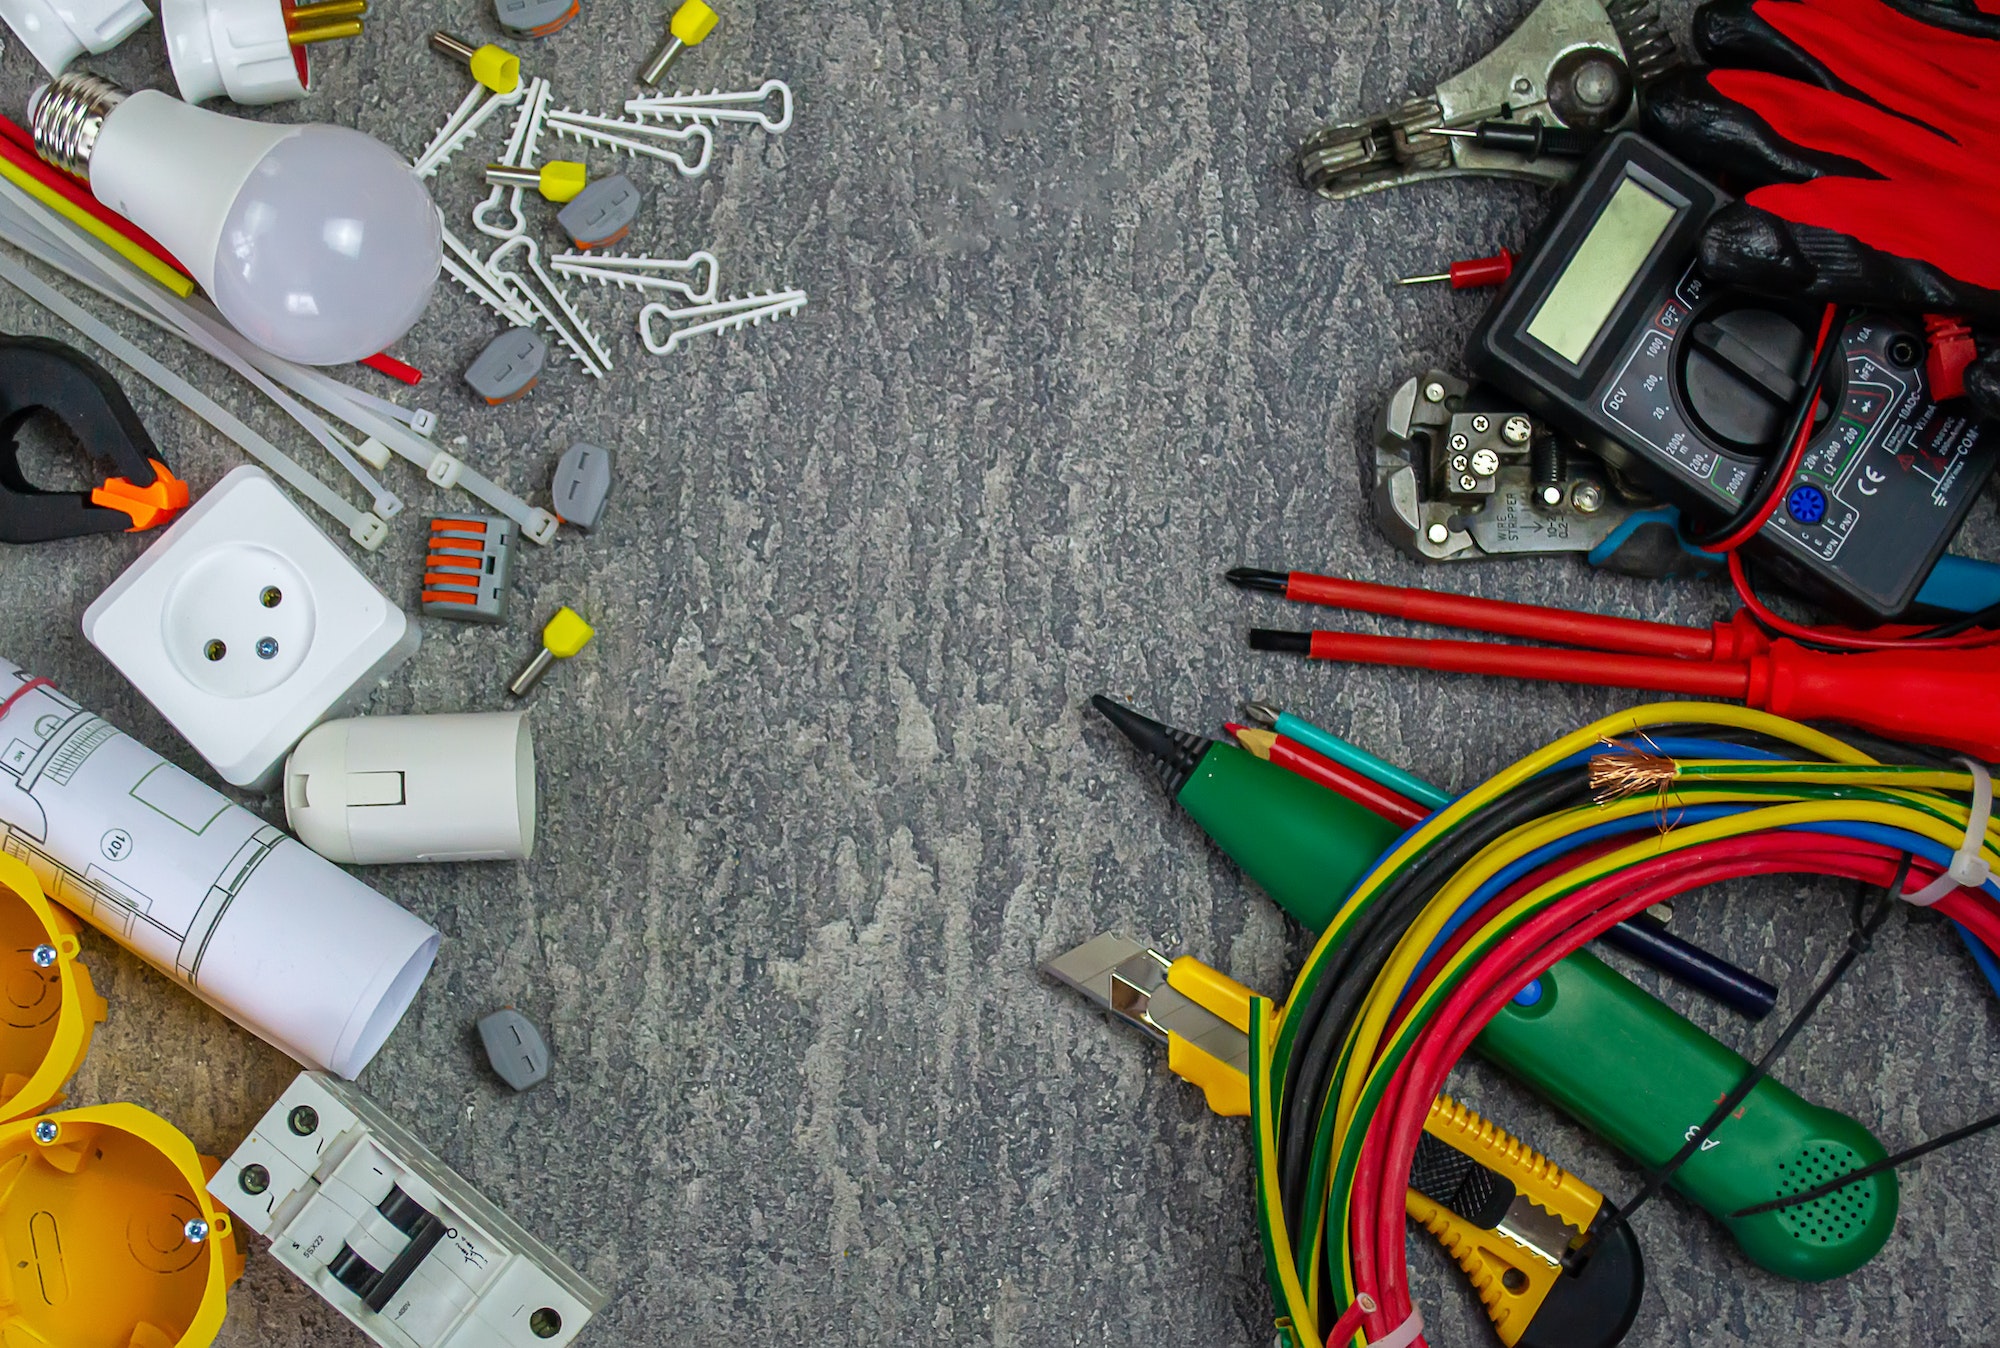 Electrical tools and a set of components for use in electrical installations